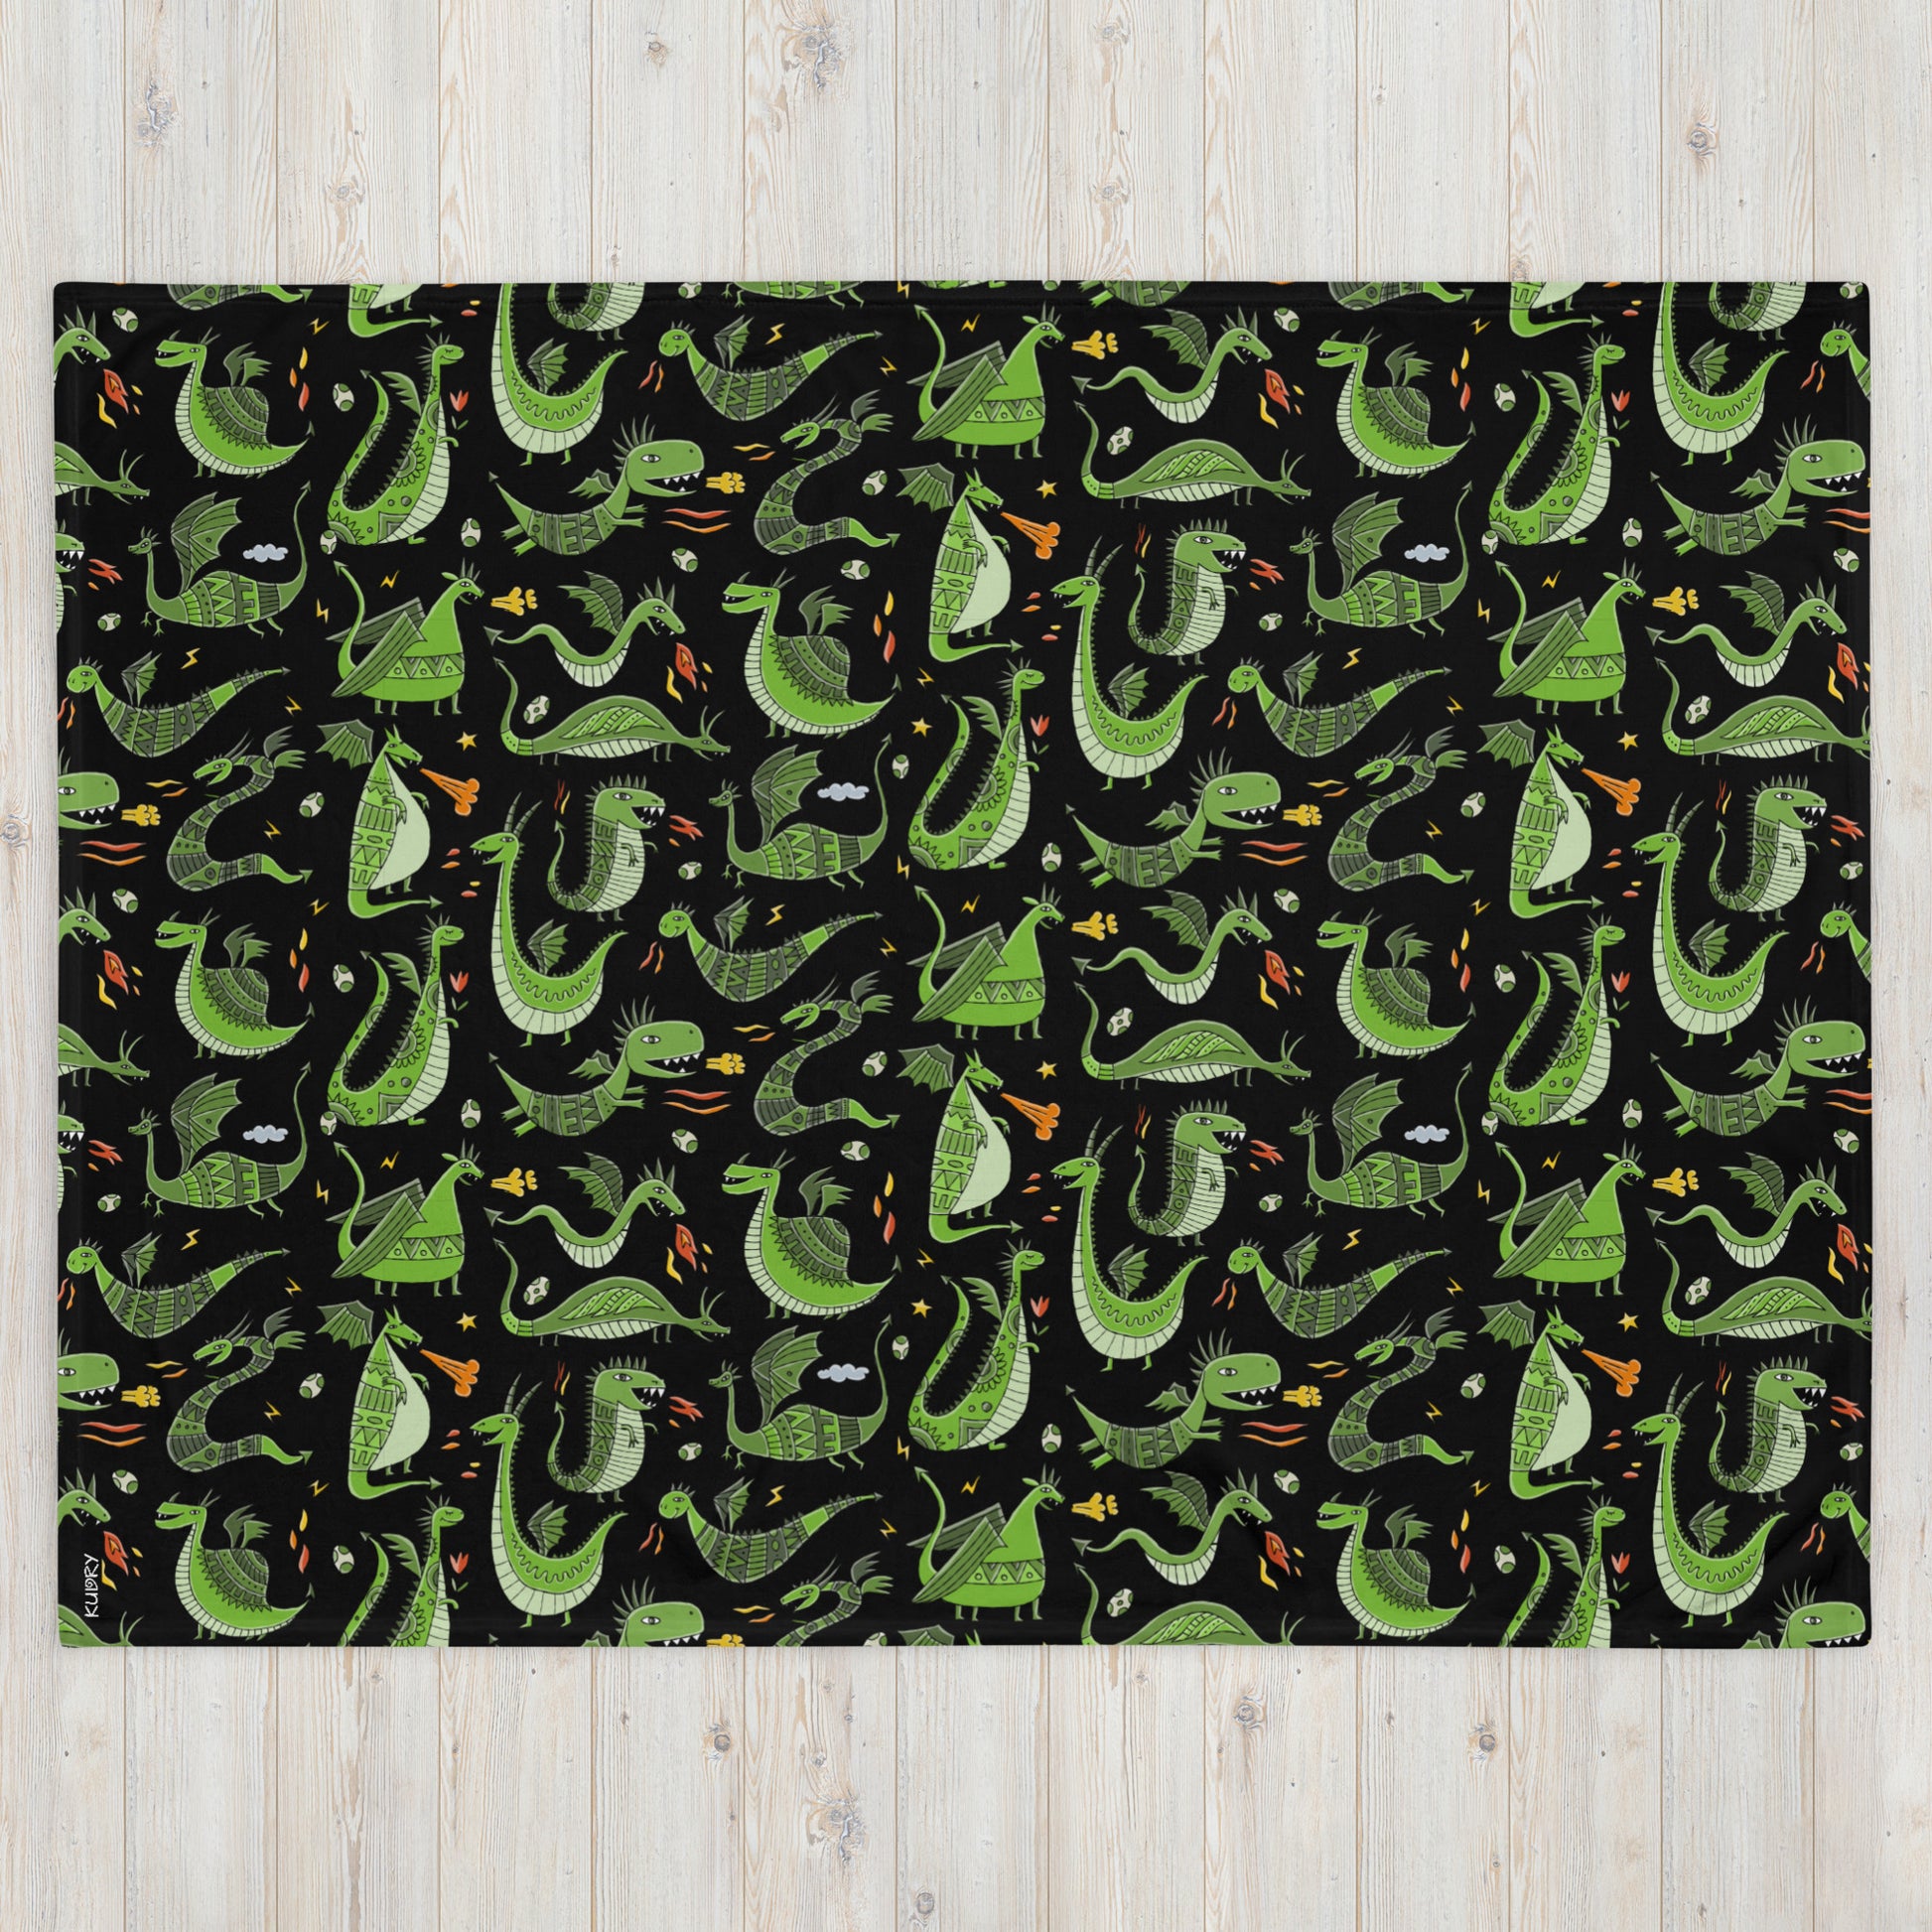 Black blanket 60x80 with funny green dragons